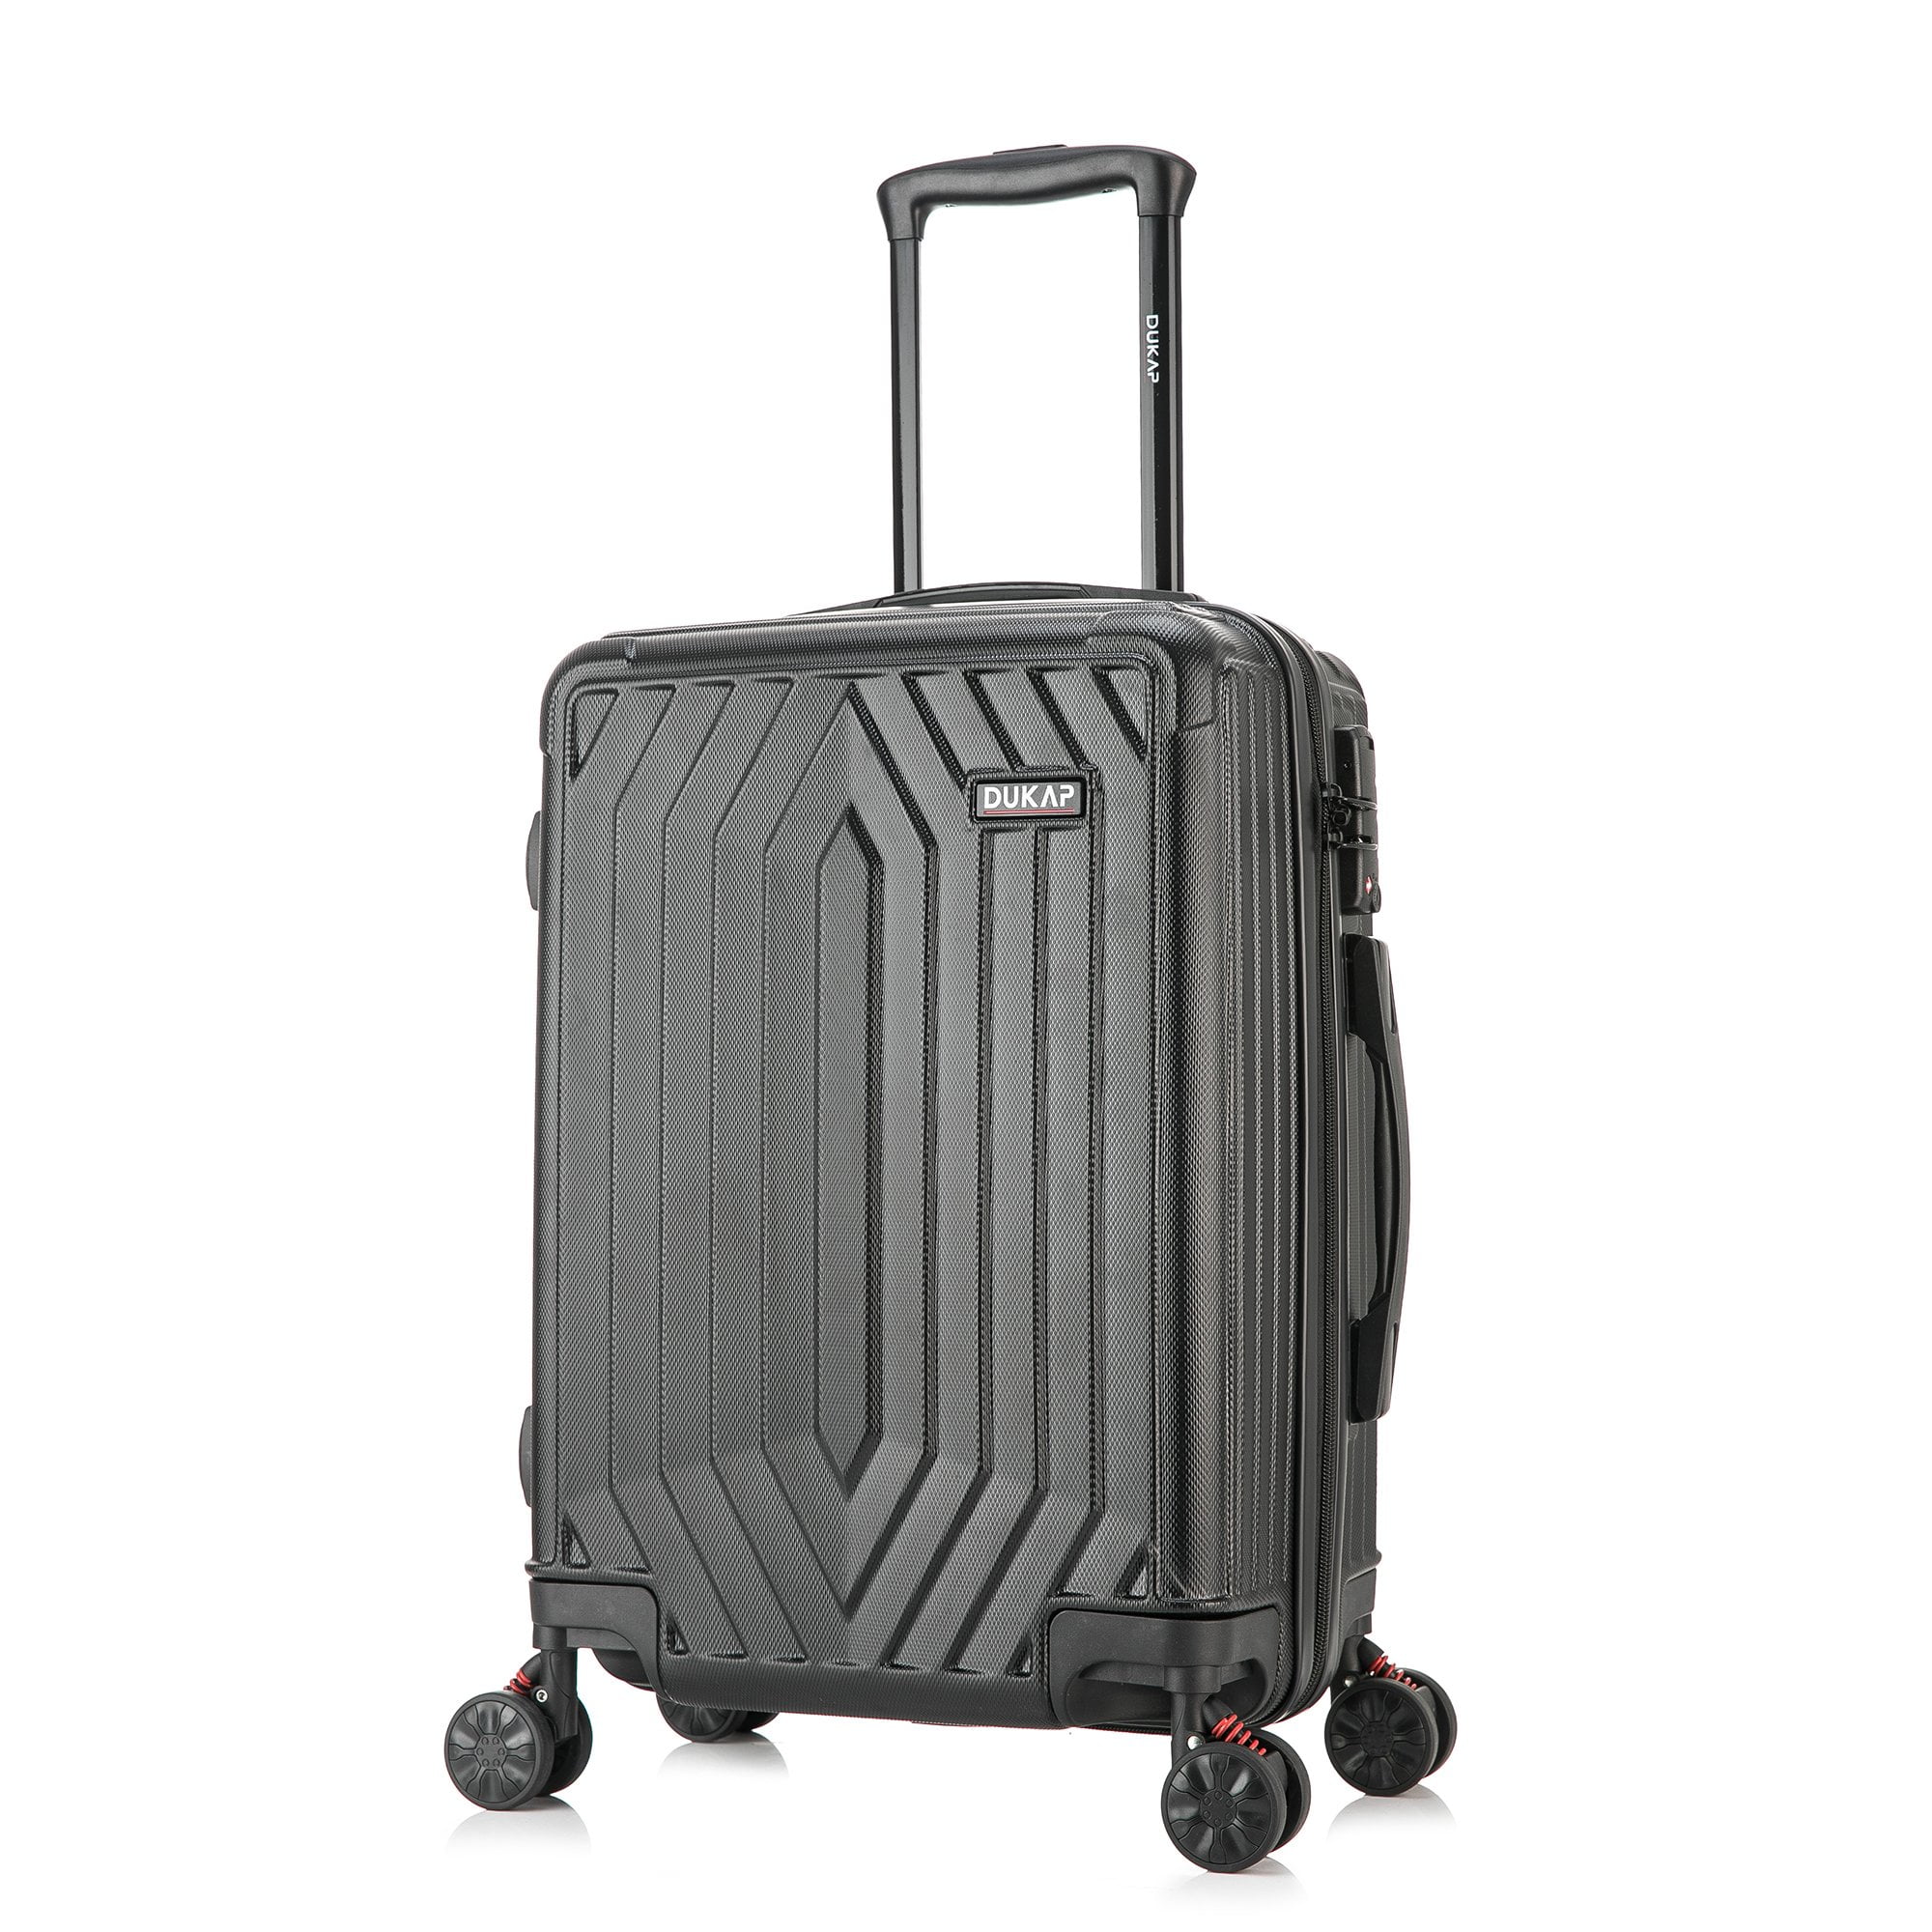 DUKAP Luggage Suitcases with Wheels Lightweight Hardside Spinner 20 inches carry-on Black Rodez Collection 